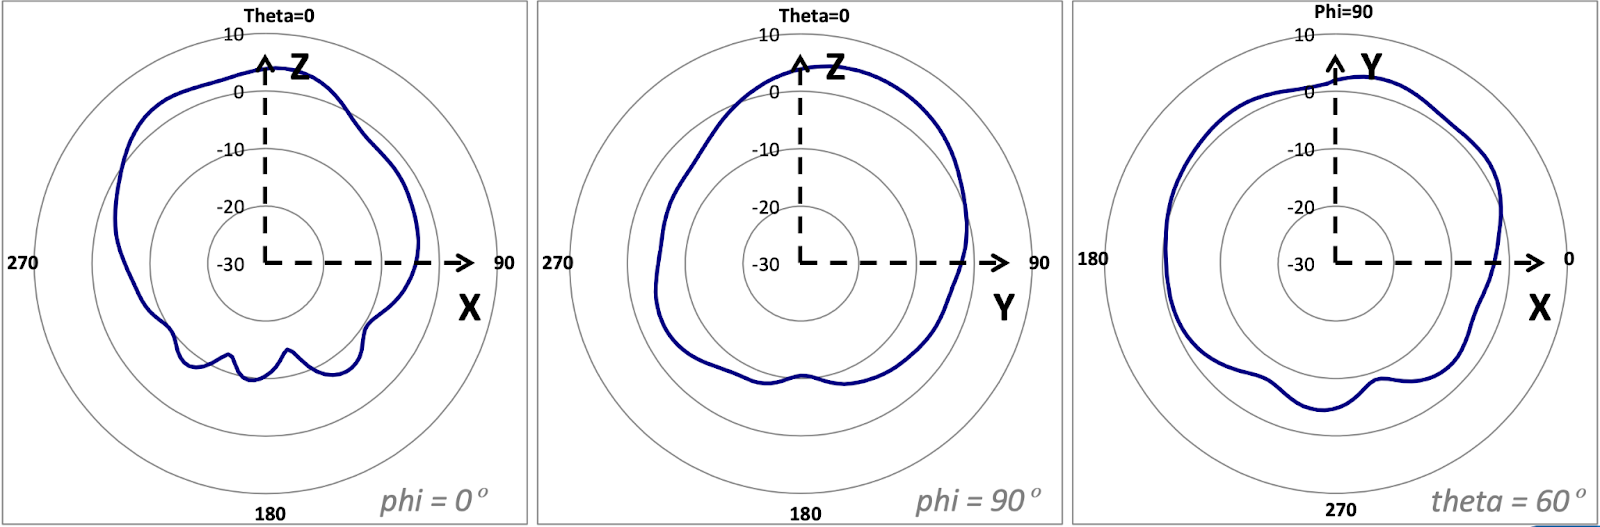 Signal coverage pattern for MR28 on BLE (with Phi and Theta values)